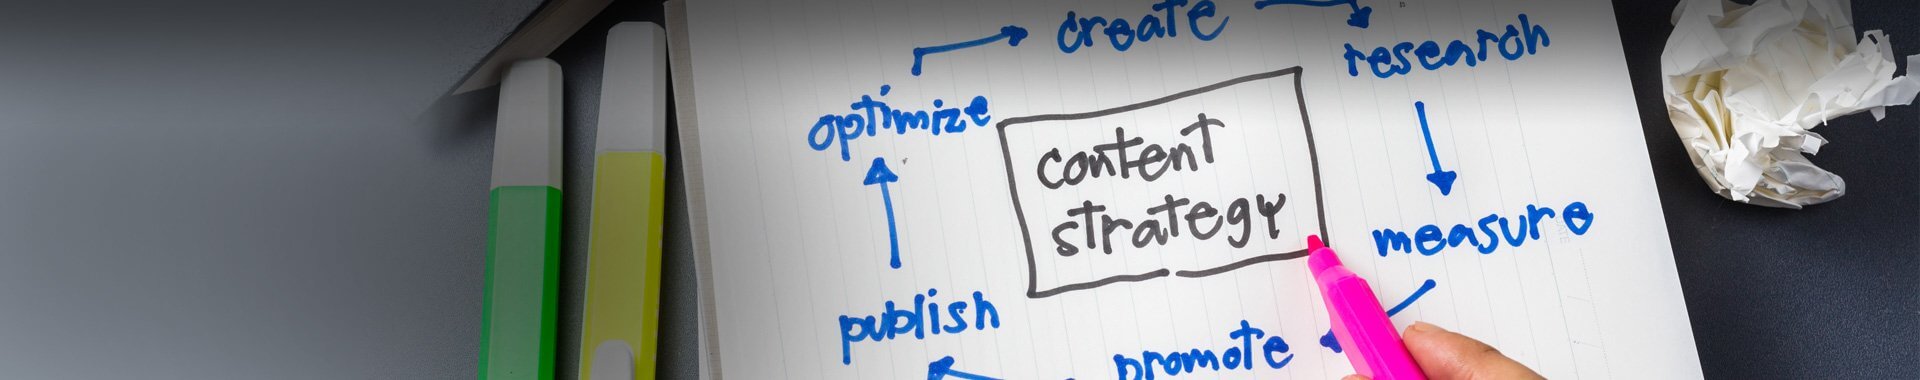 content writing service banner